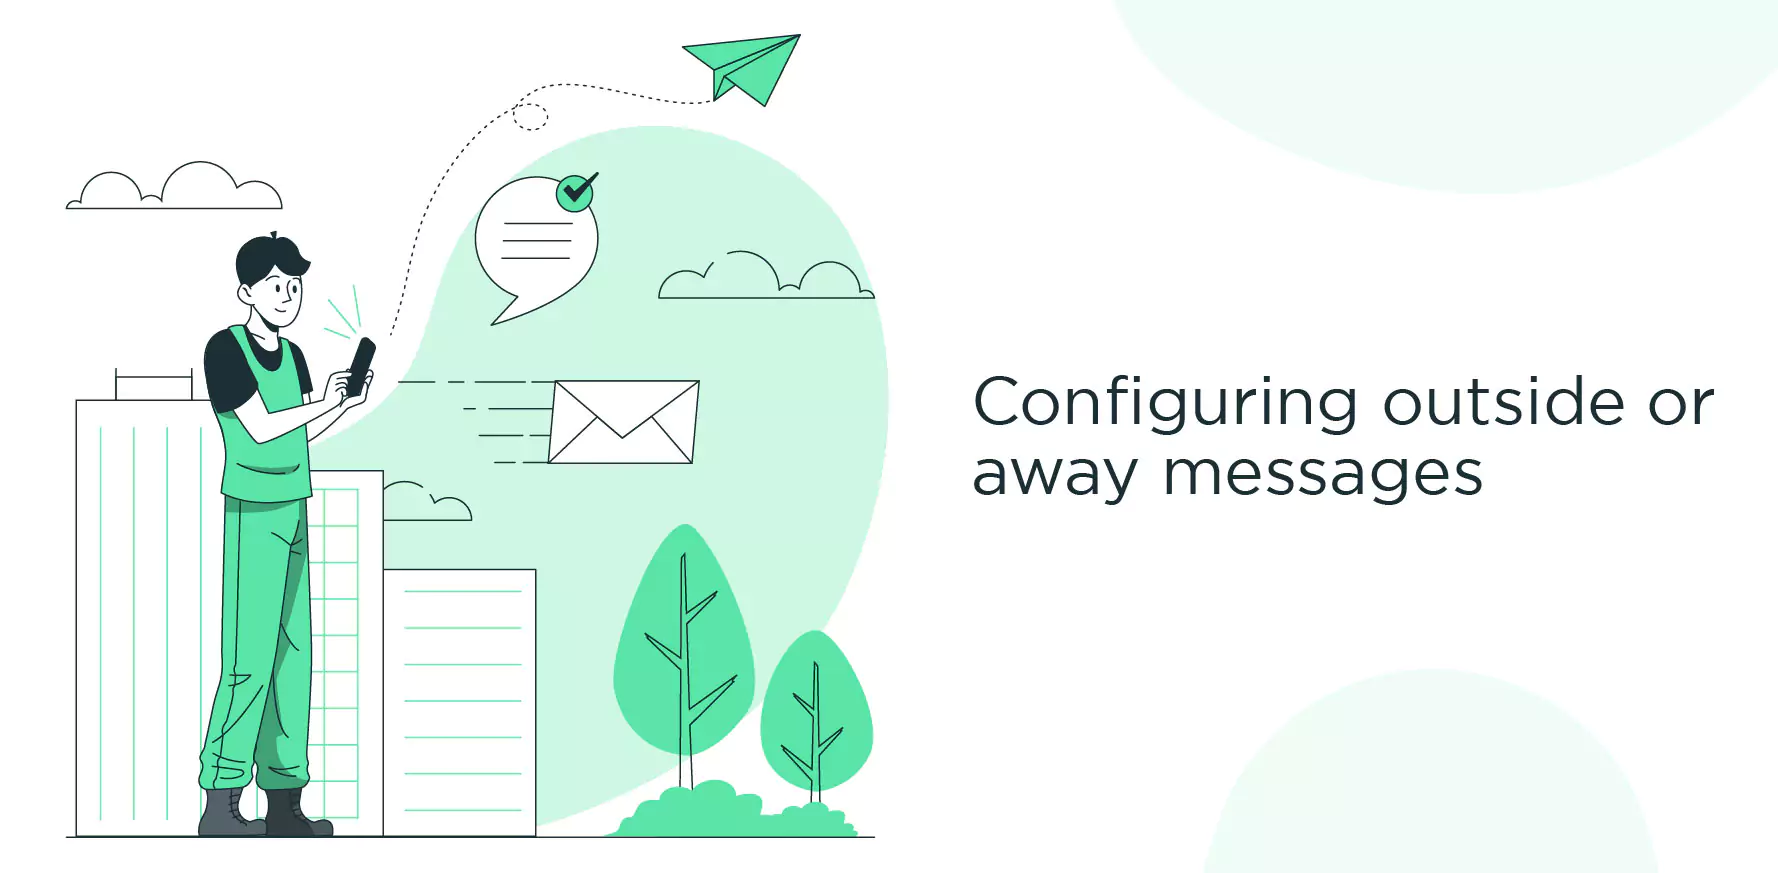 Configuring outside or away messages